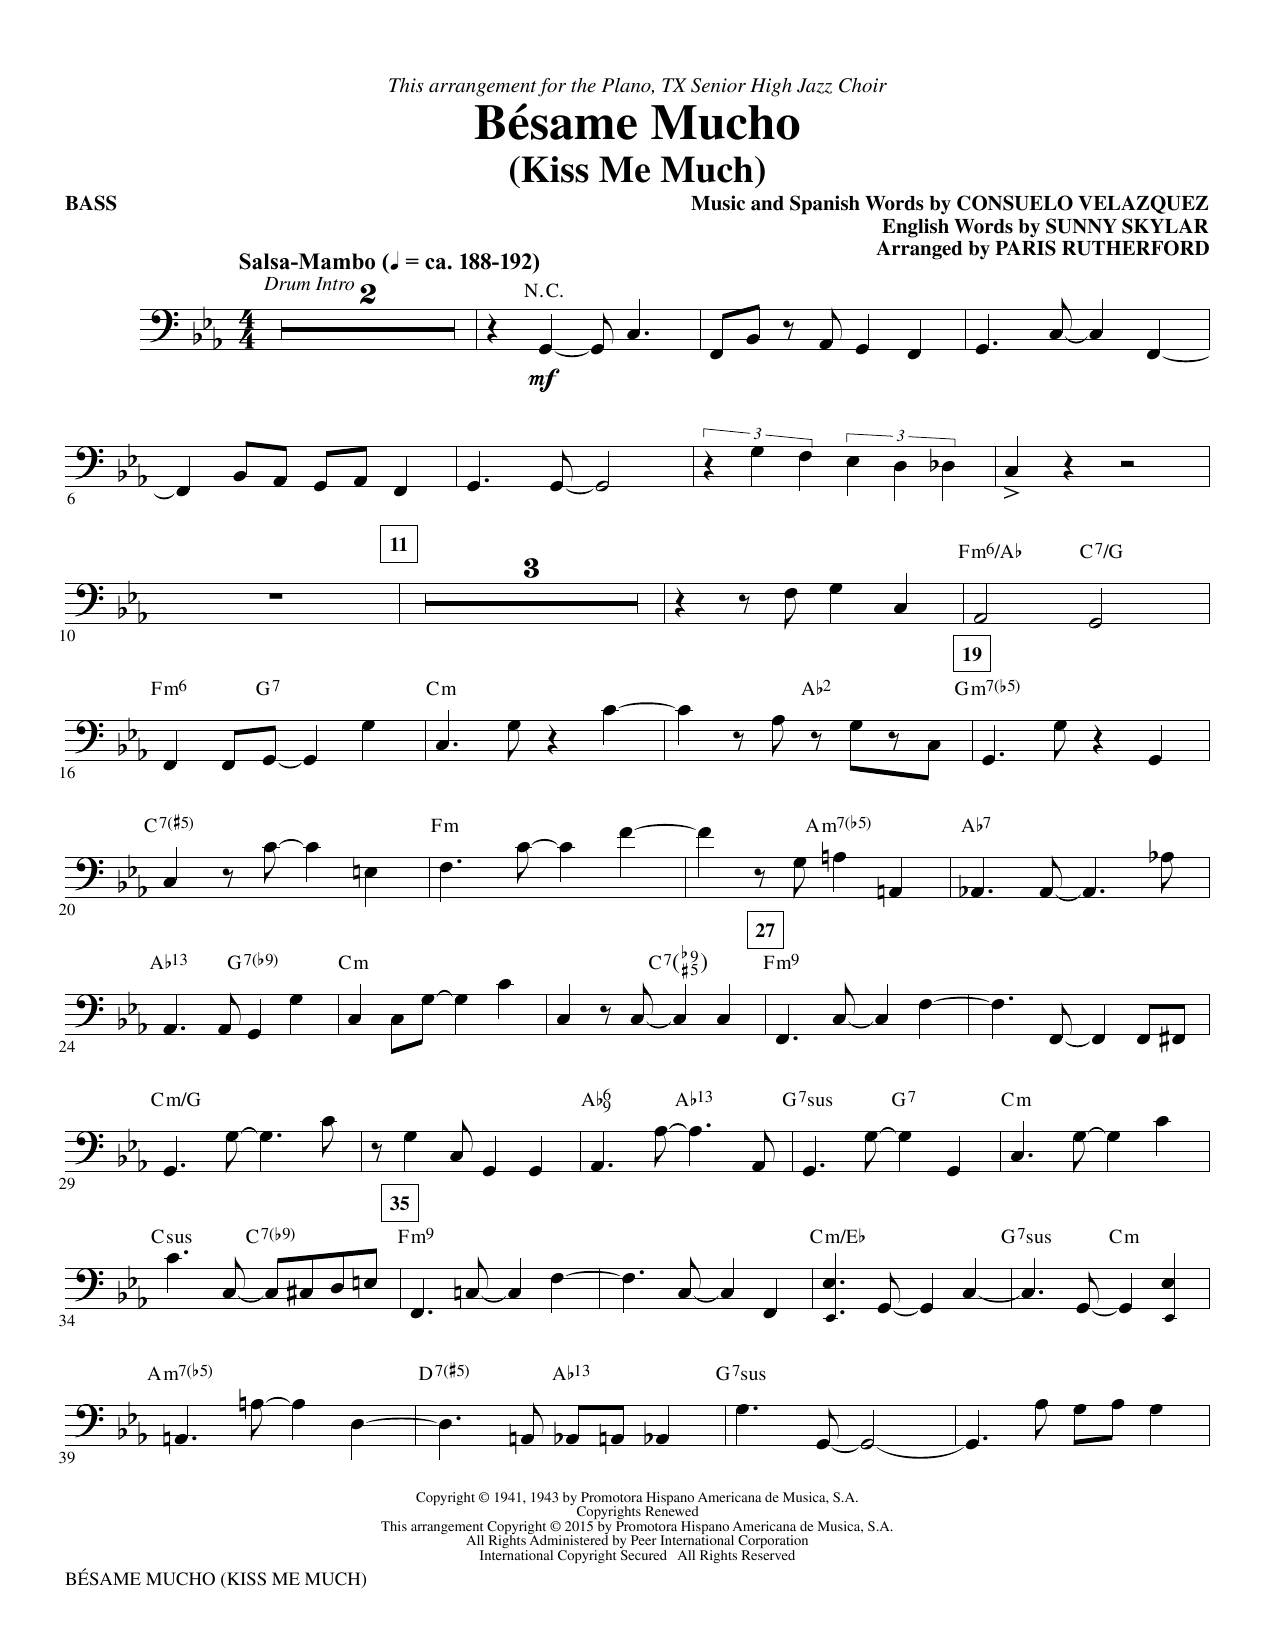 Paris Rutherford Besame Mucho (Kiss Me Much) - Bass sheet music notes and chords. Download Printable PDF.